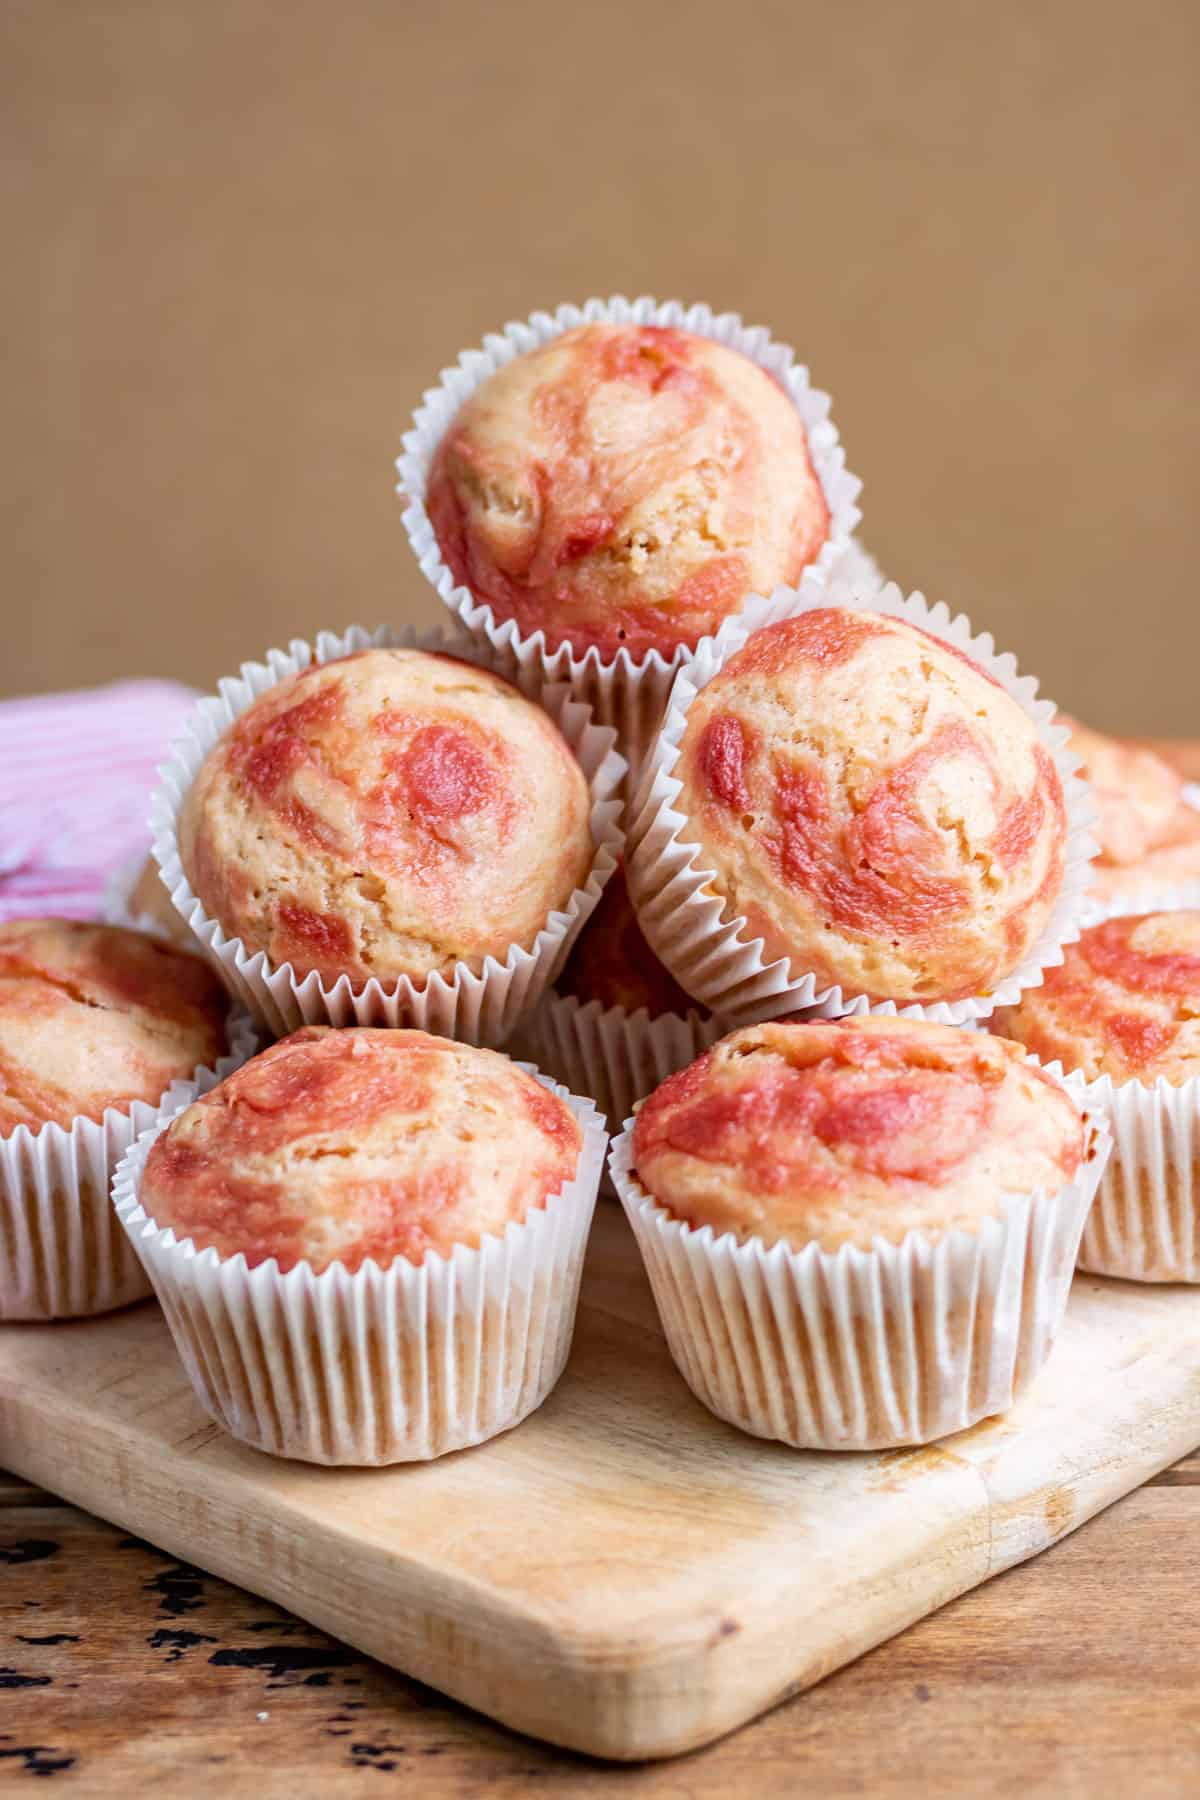 A pile of rhubarb muffins.